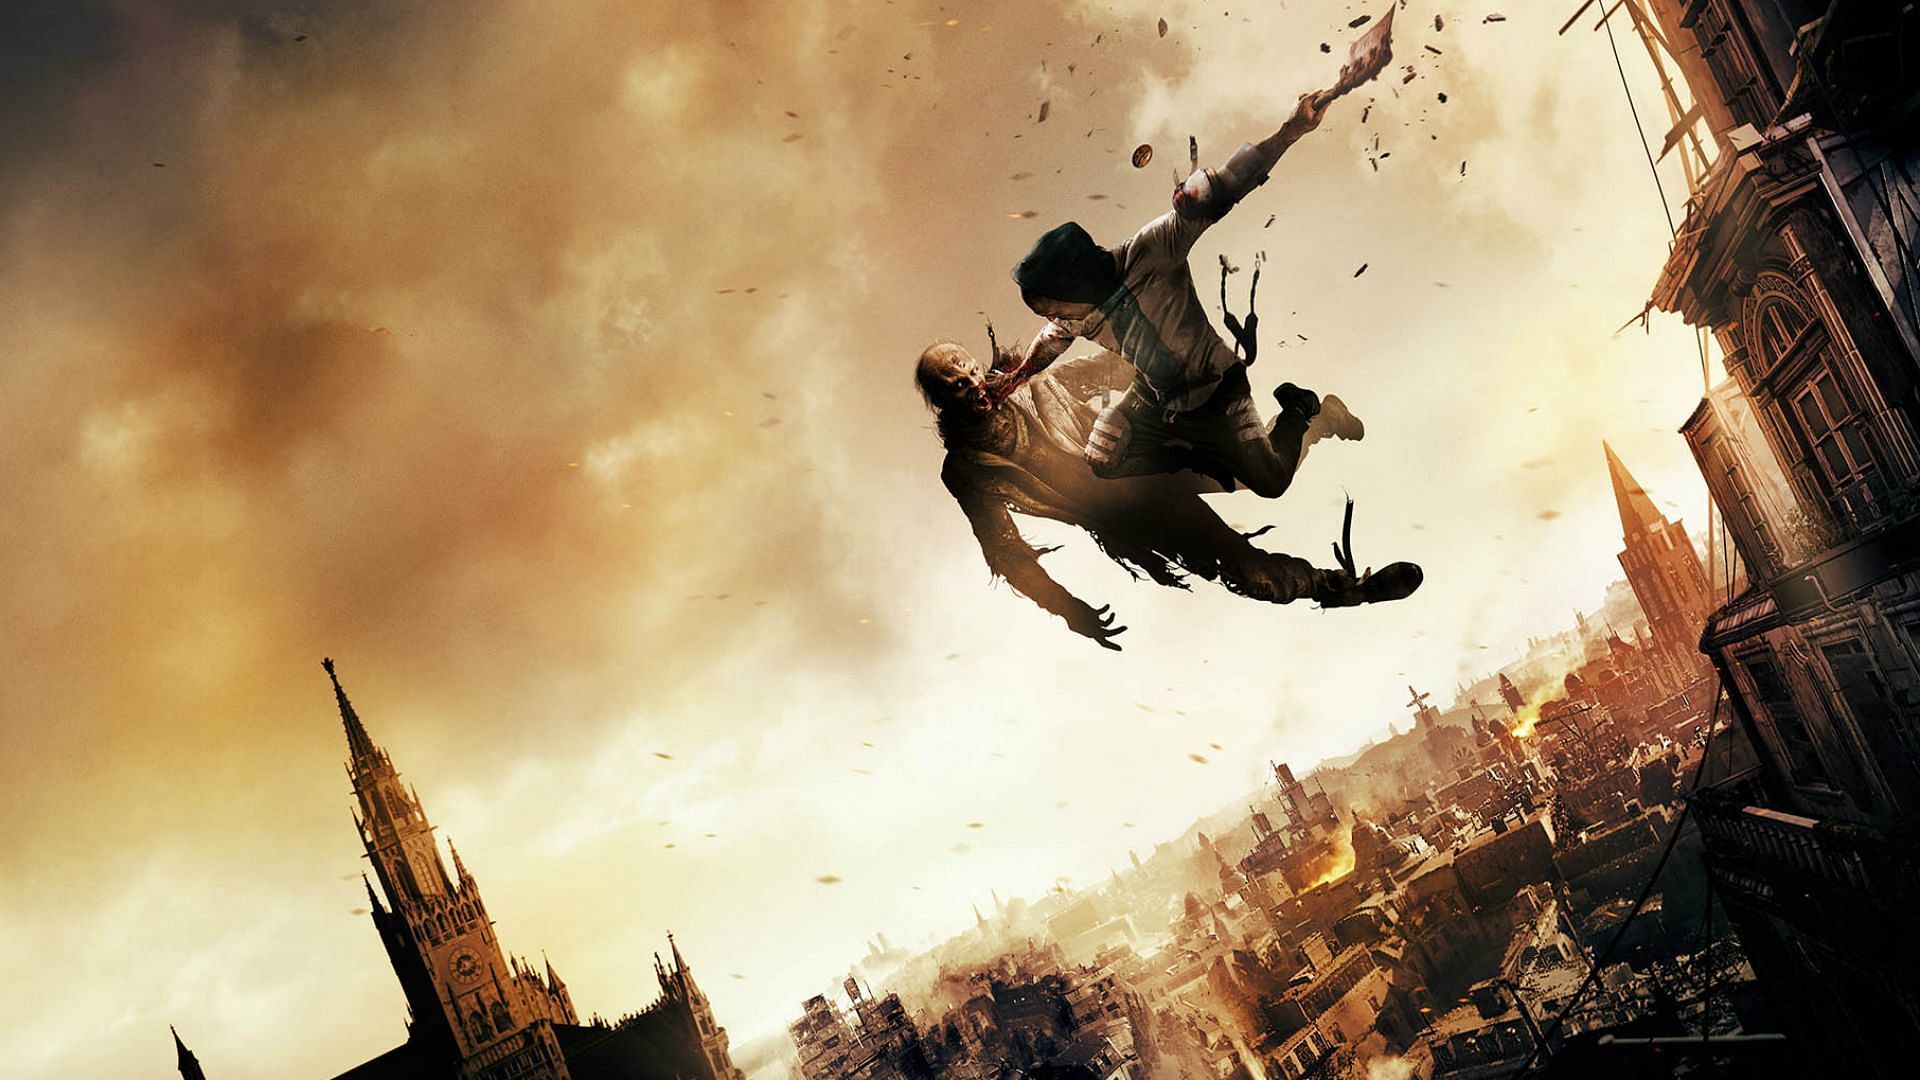 Dying Light 2: preview, news, trailers, release date and more